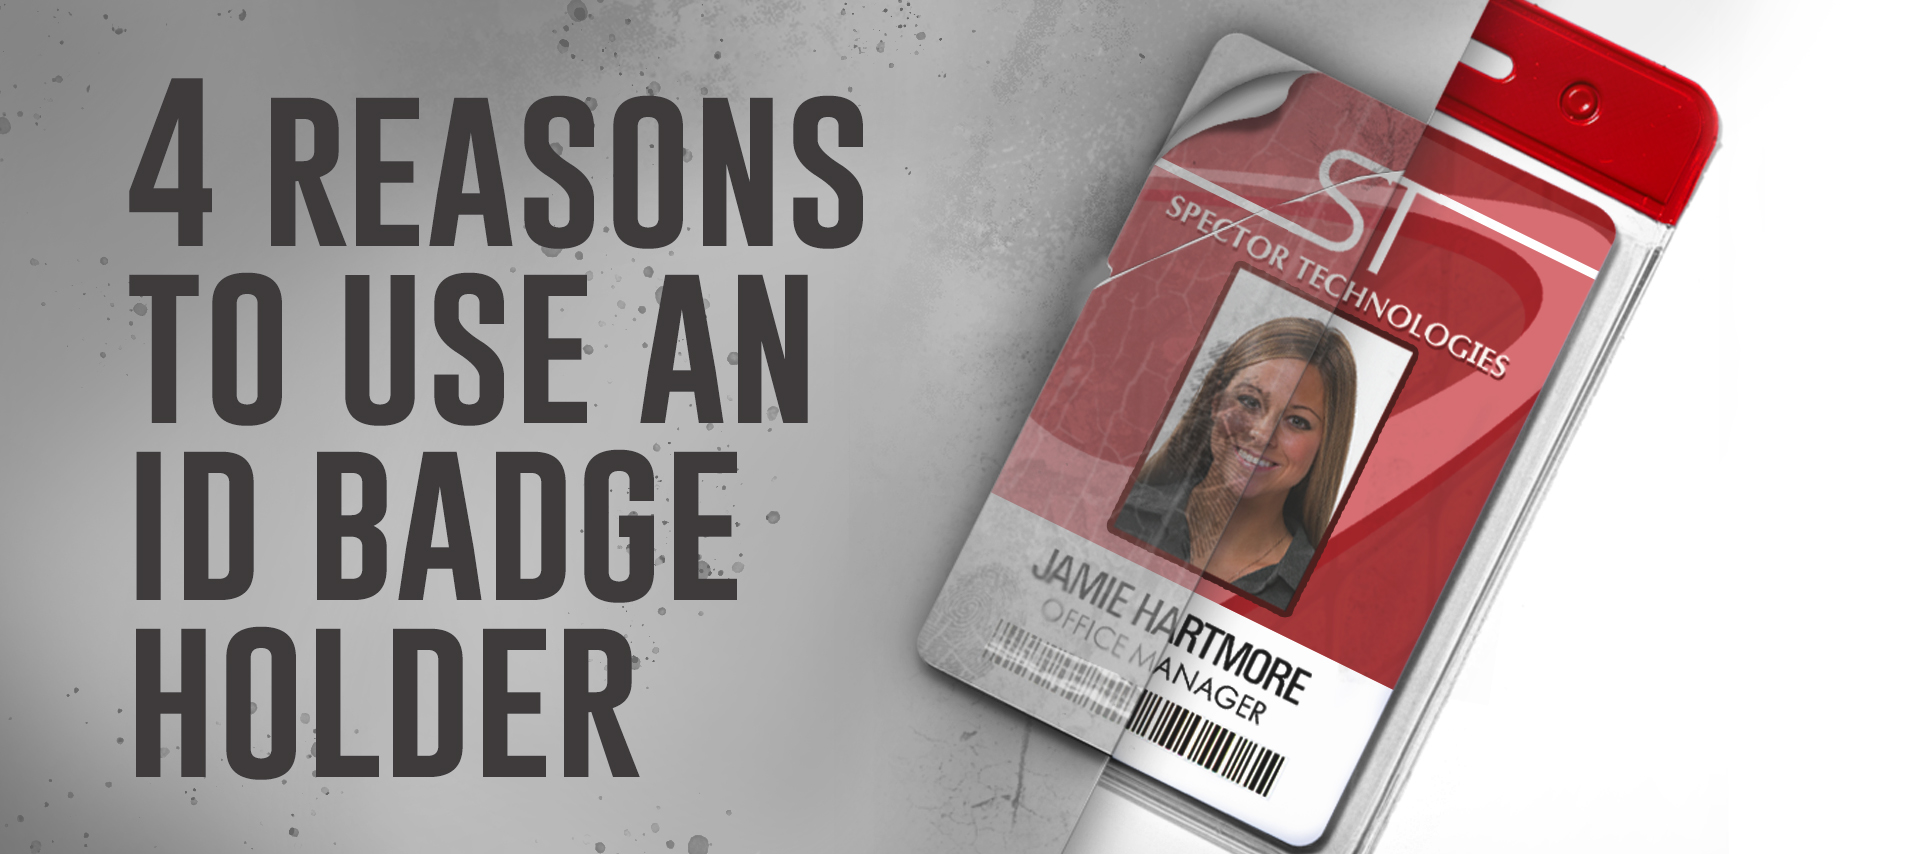 4 Reasons to use an ID Badge Holder